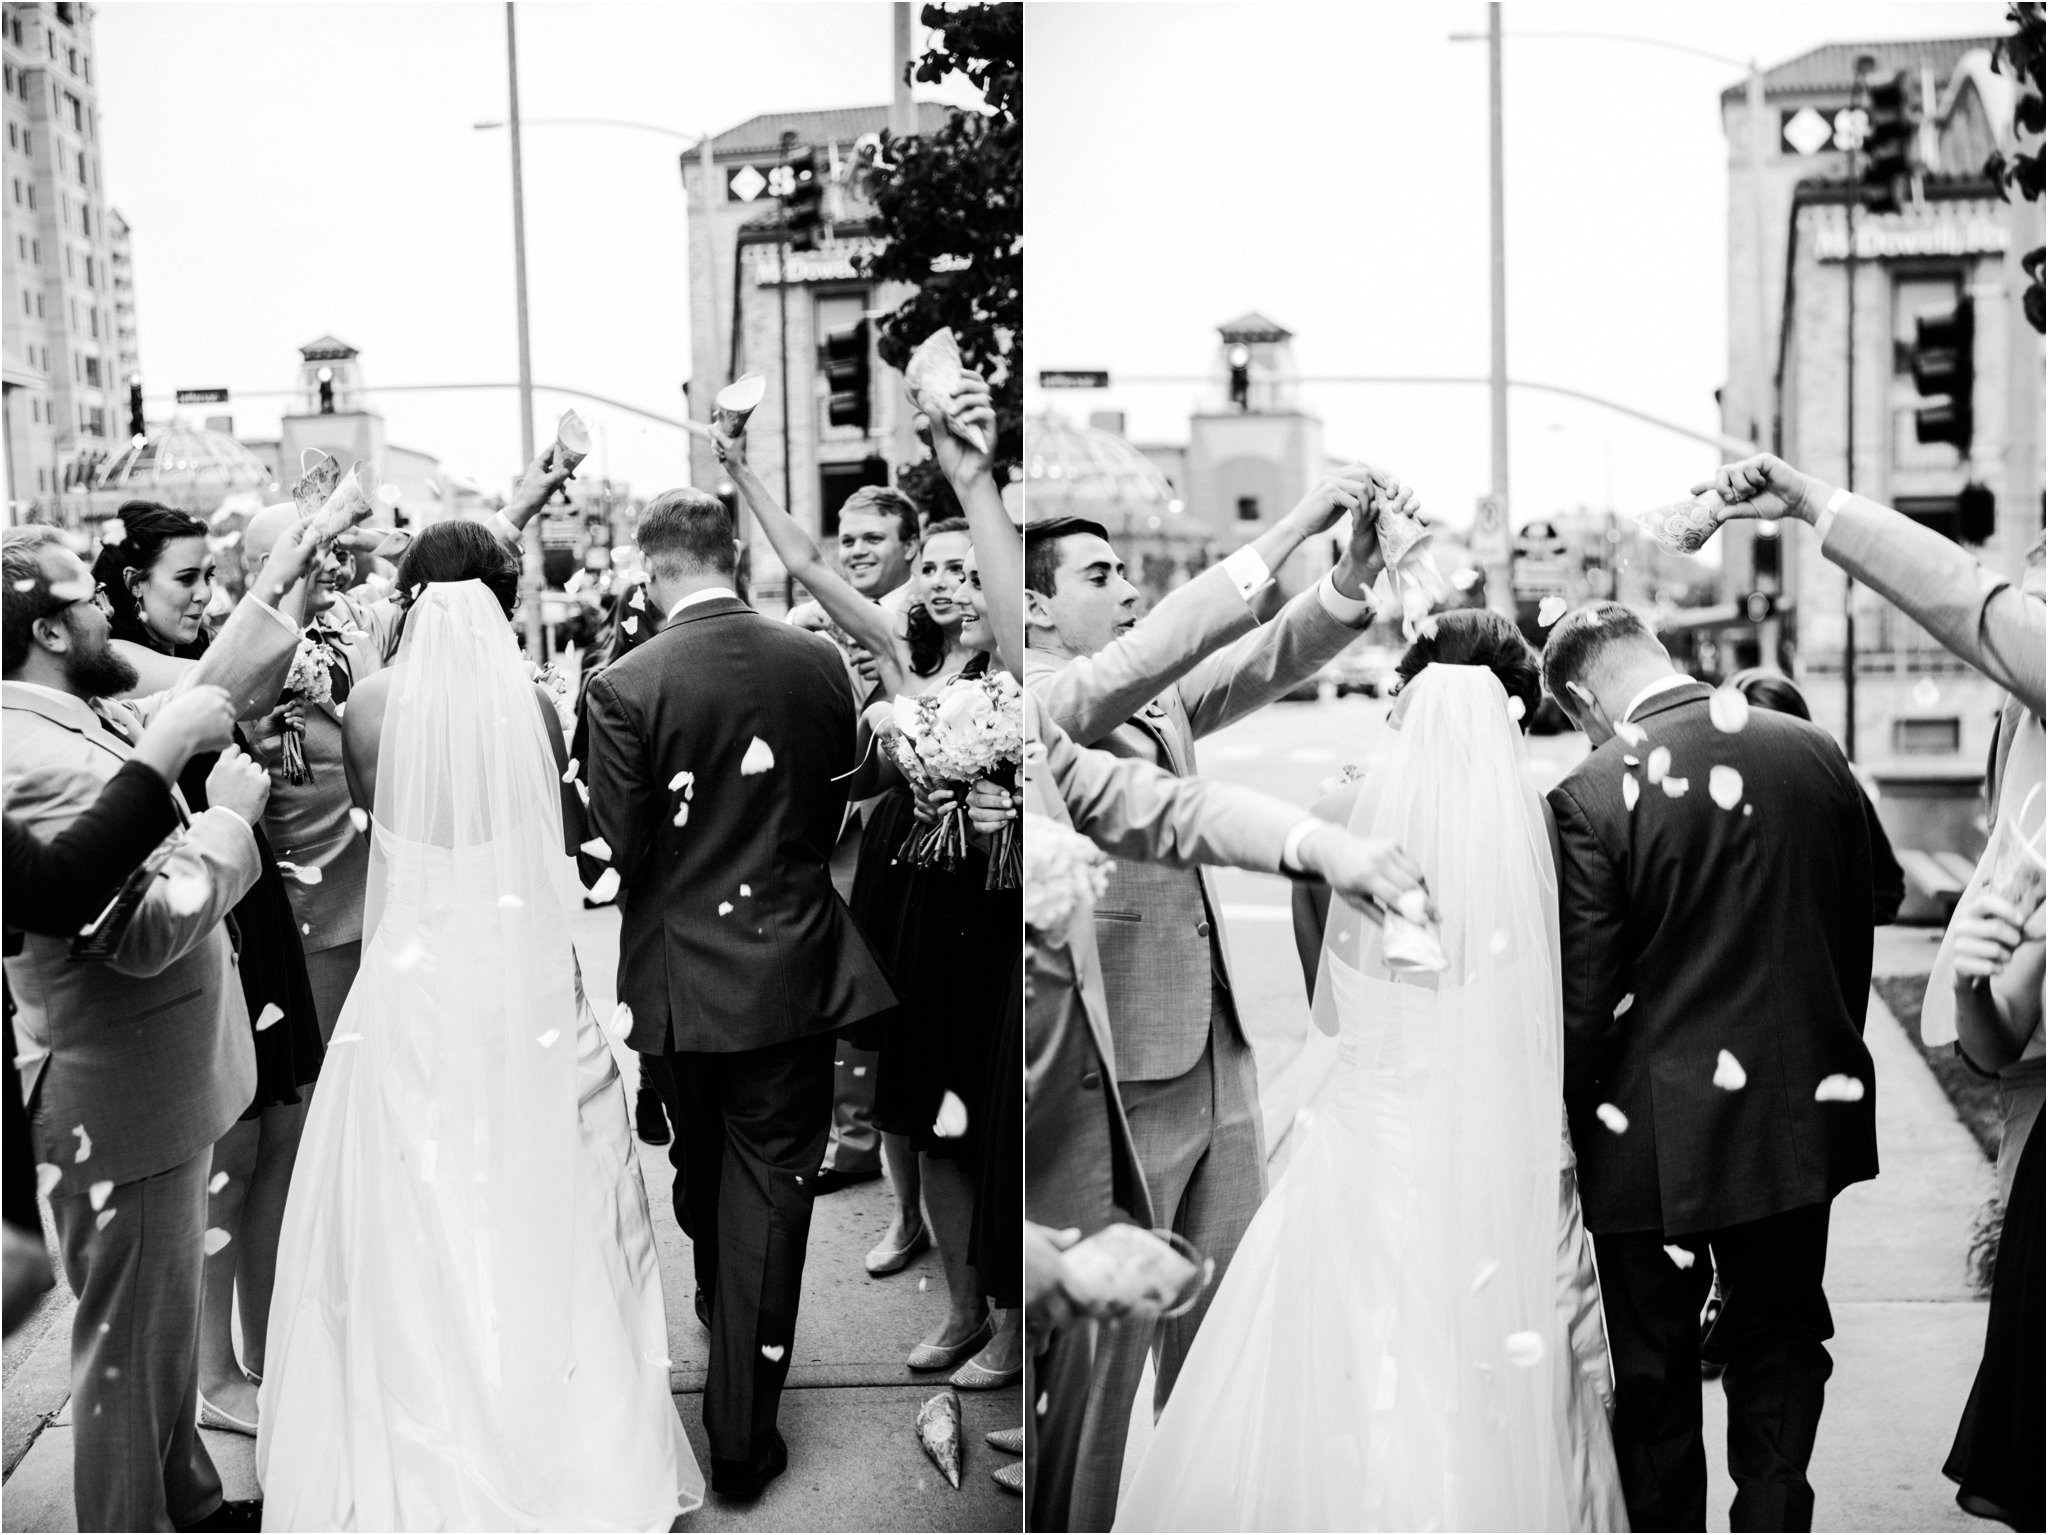 black and white | wedding | wedding photos | wedding photography | images by feliciathephotographer.com | Country Club Plaza | Kansas City | Unity Temple | wedding ceremony | man and wife | church exit | flower petals | confetti | celebration | candid | street photography 